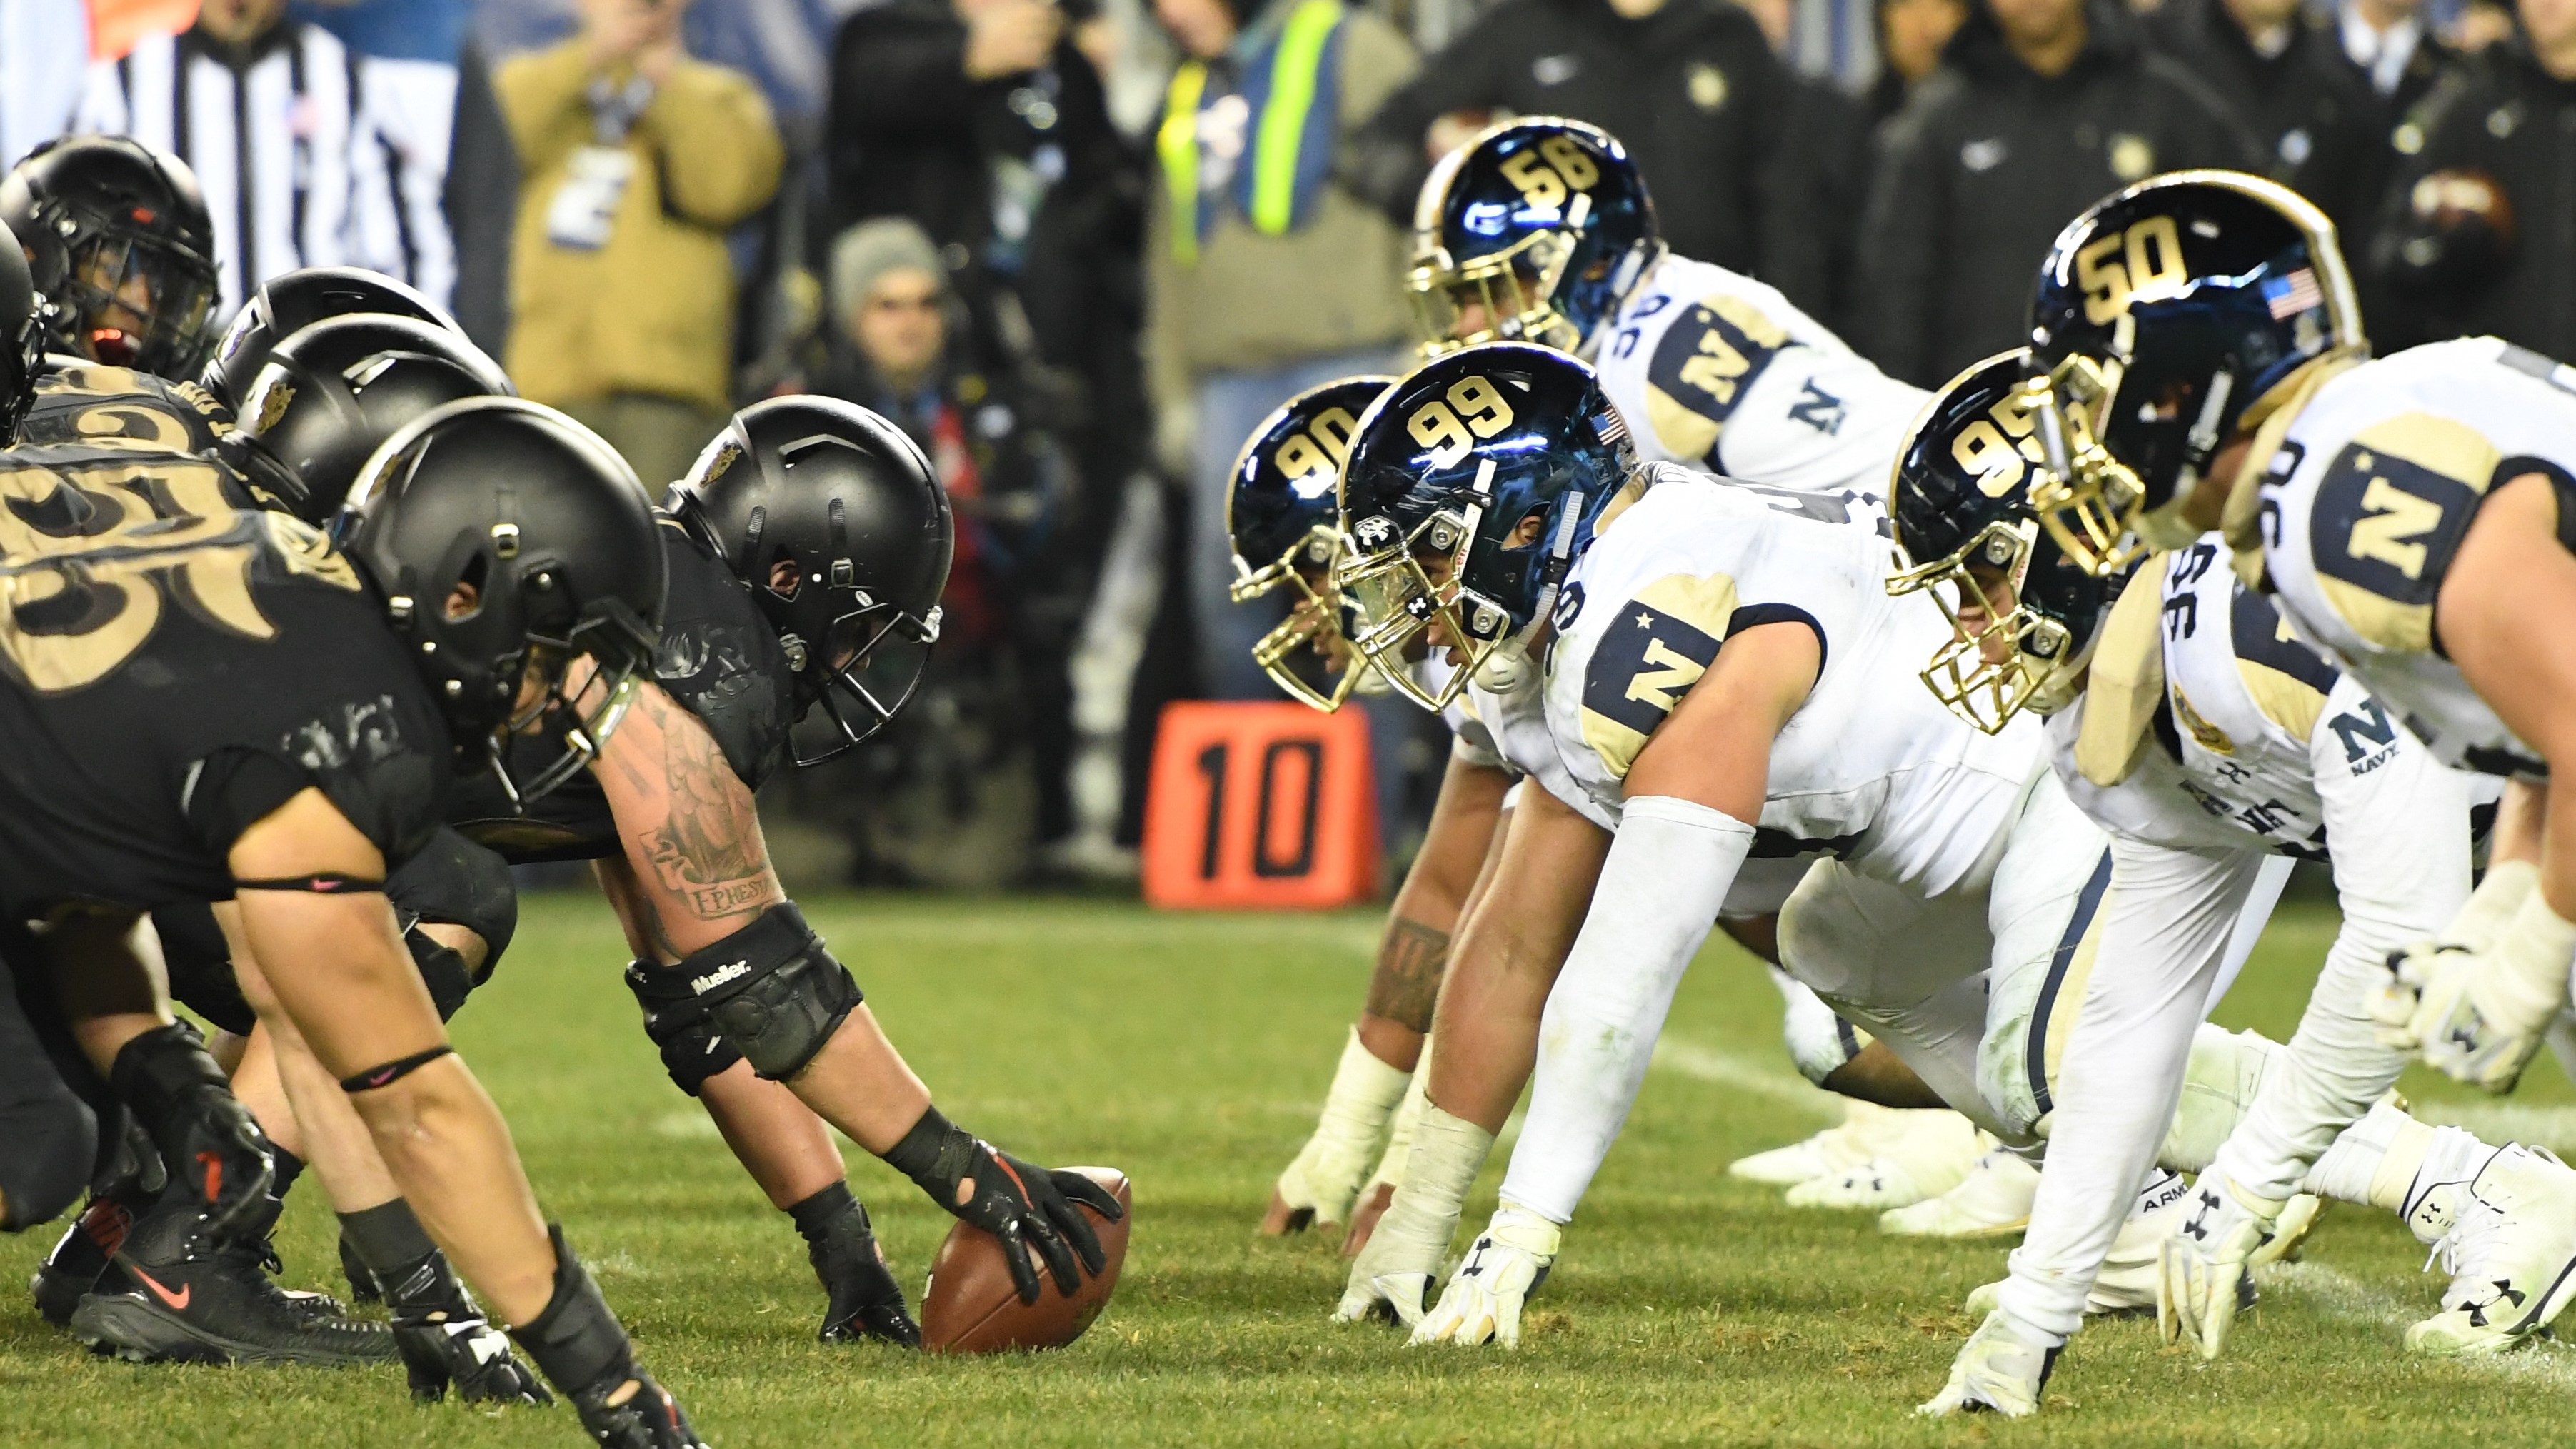 How to watch Army vs Navy college football game What to Watch